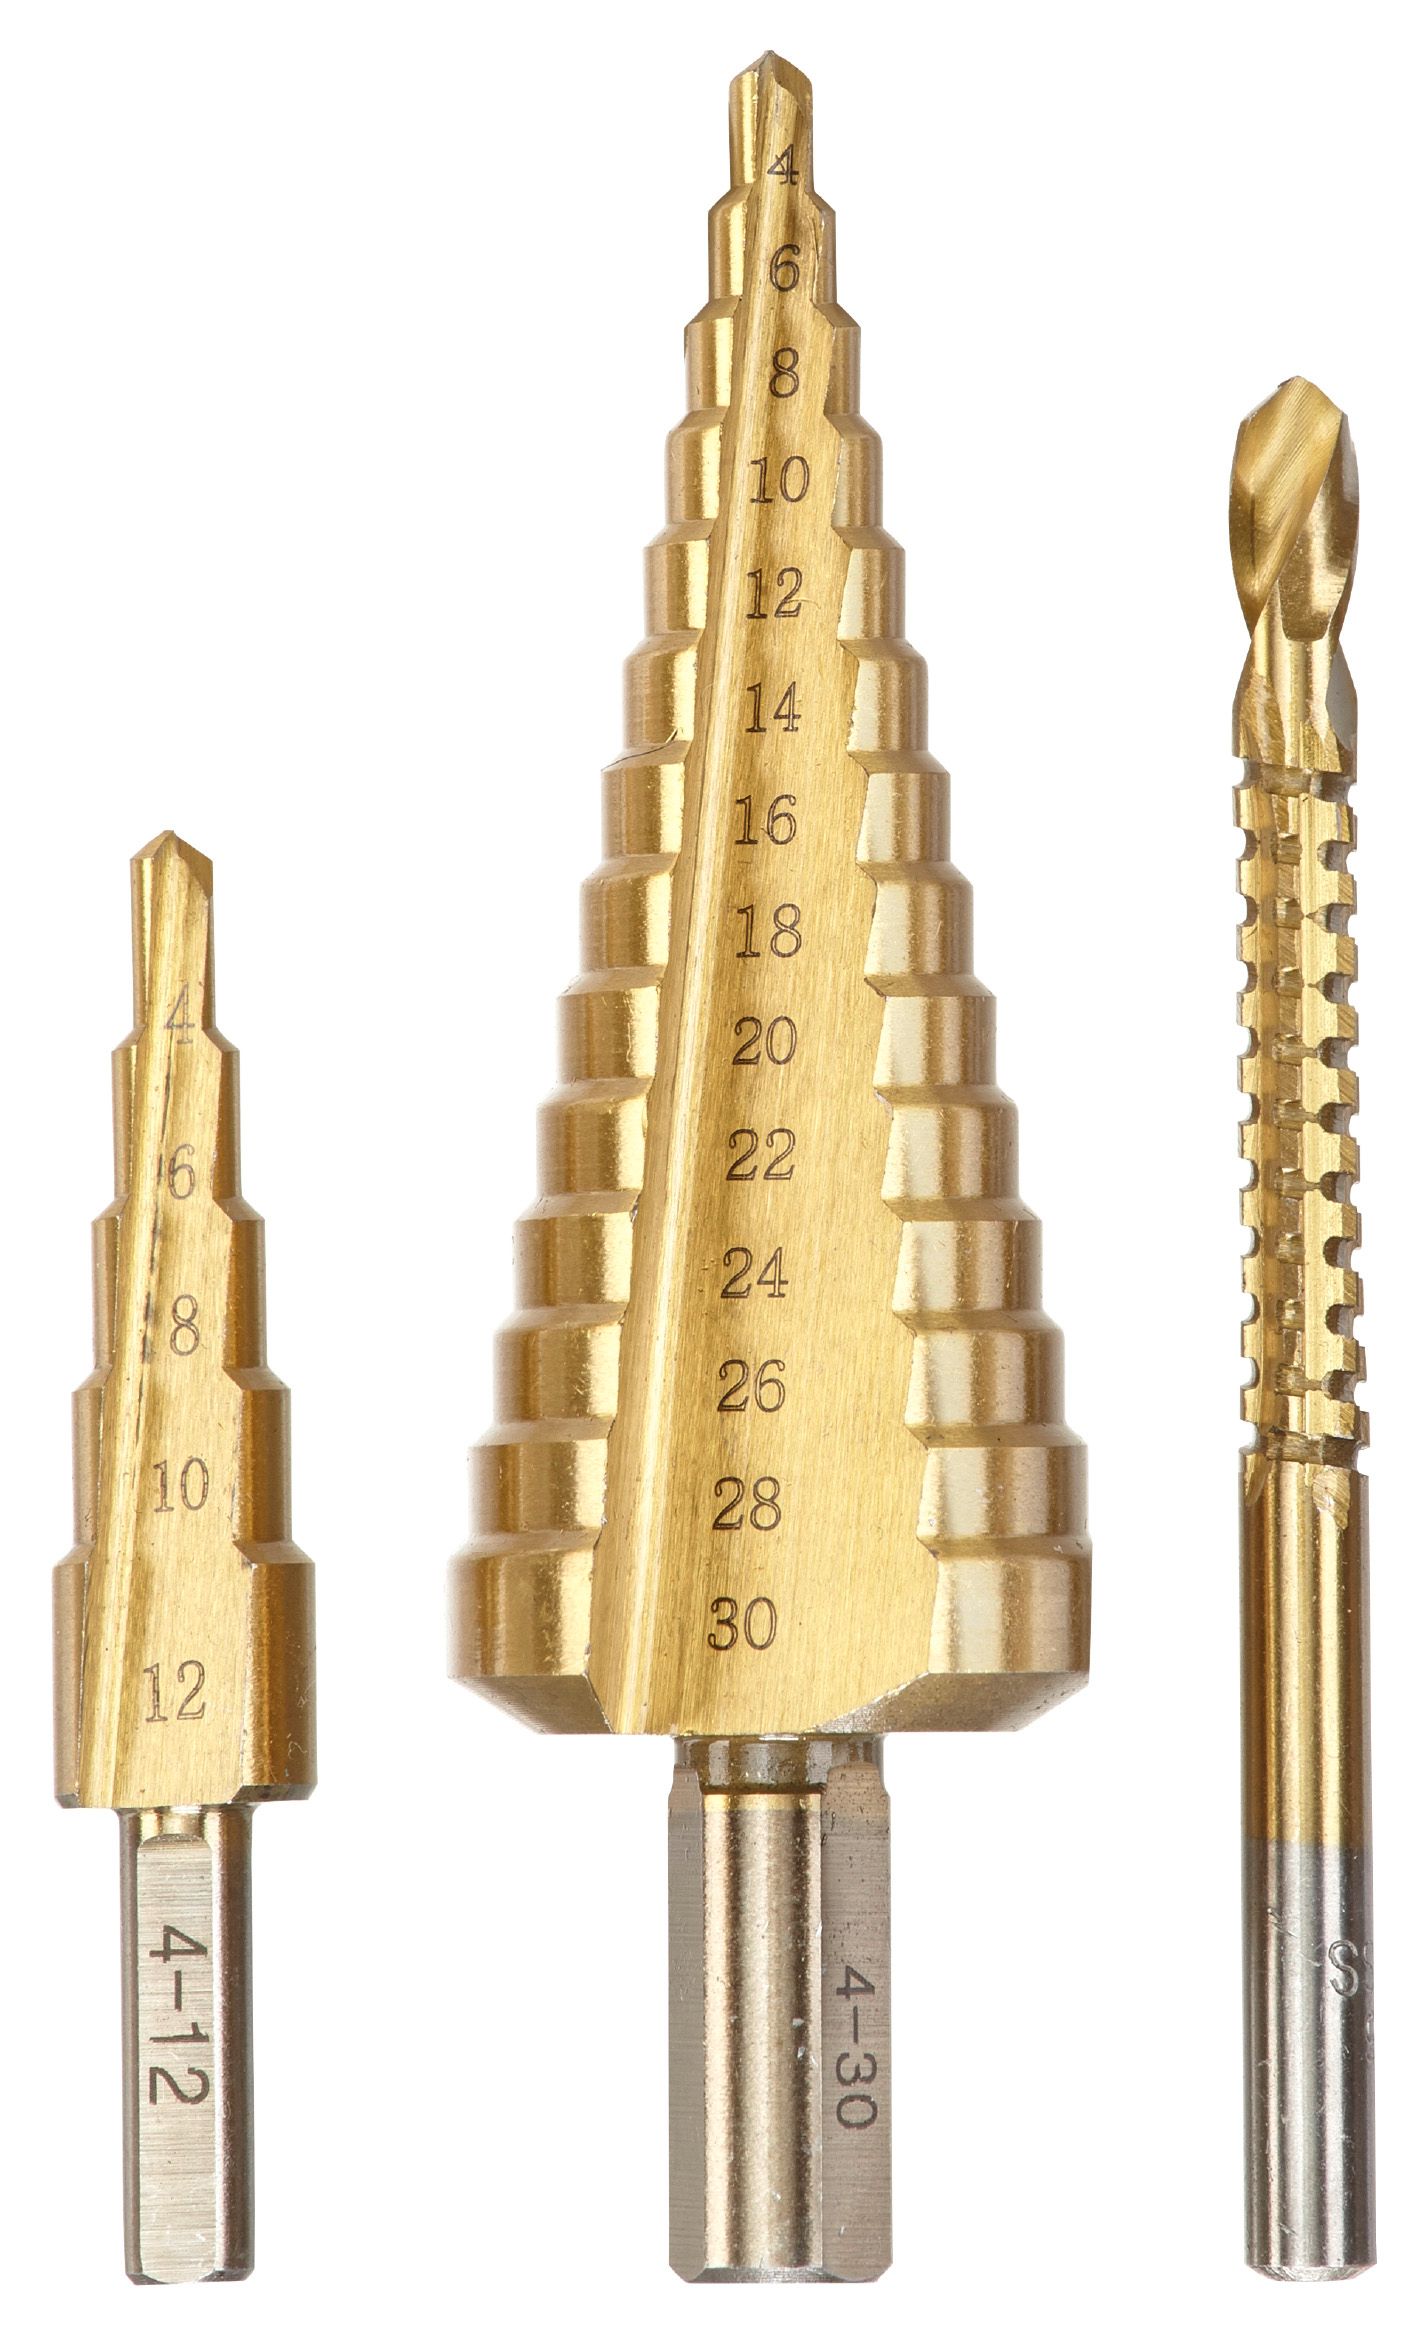 Image of Einhell kwb 3 Piece Step Drill Bit Set 4-12mm - 4-30mm & Rotary File